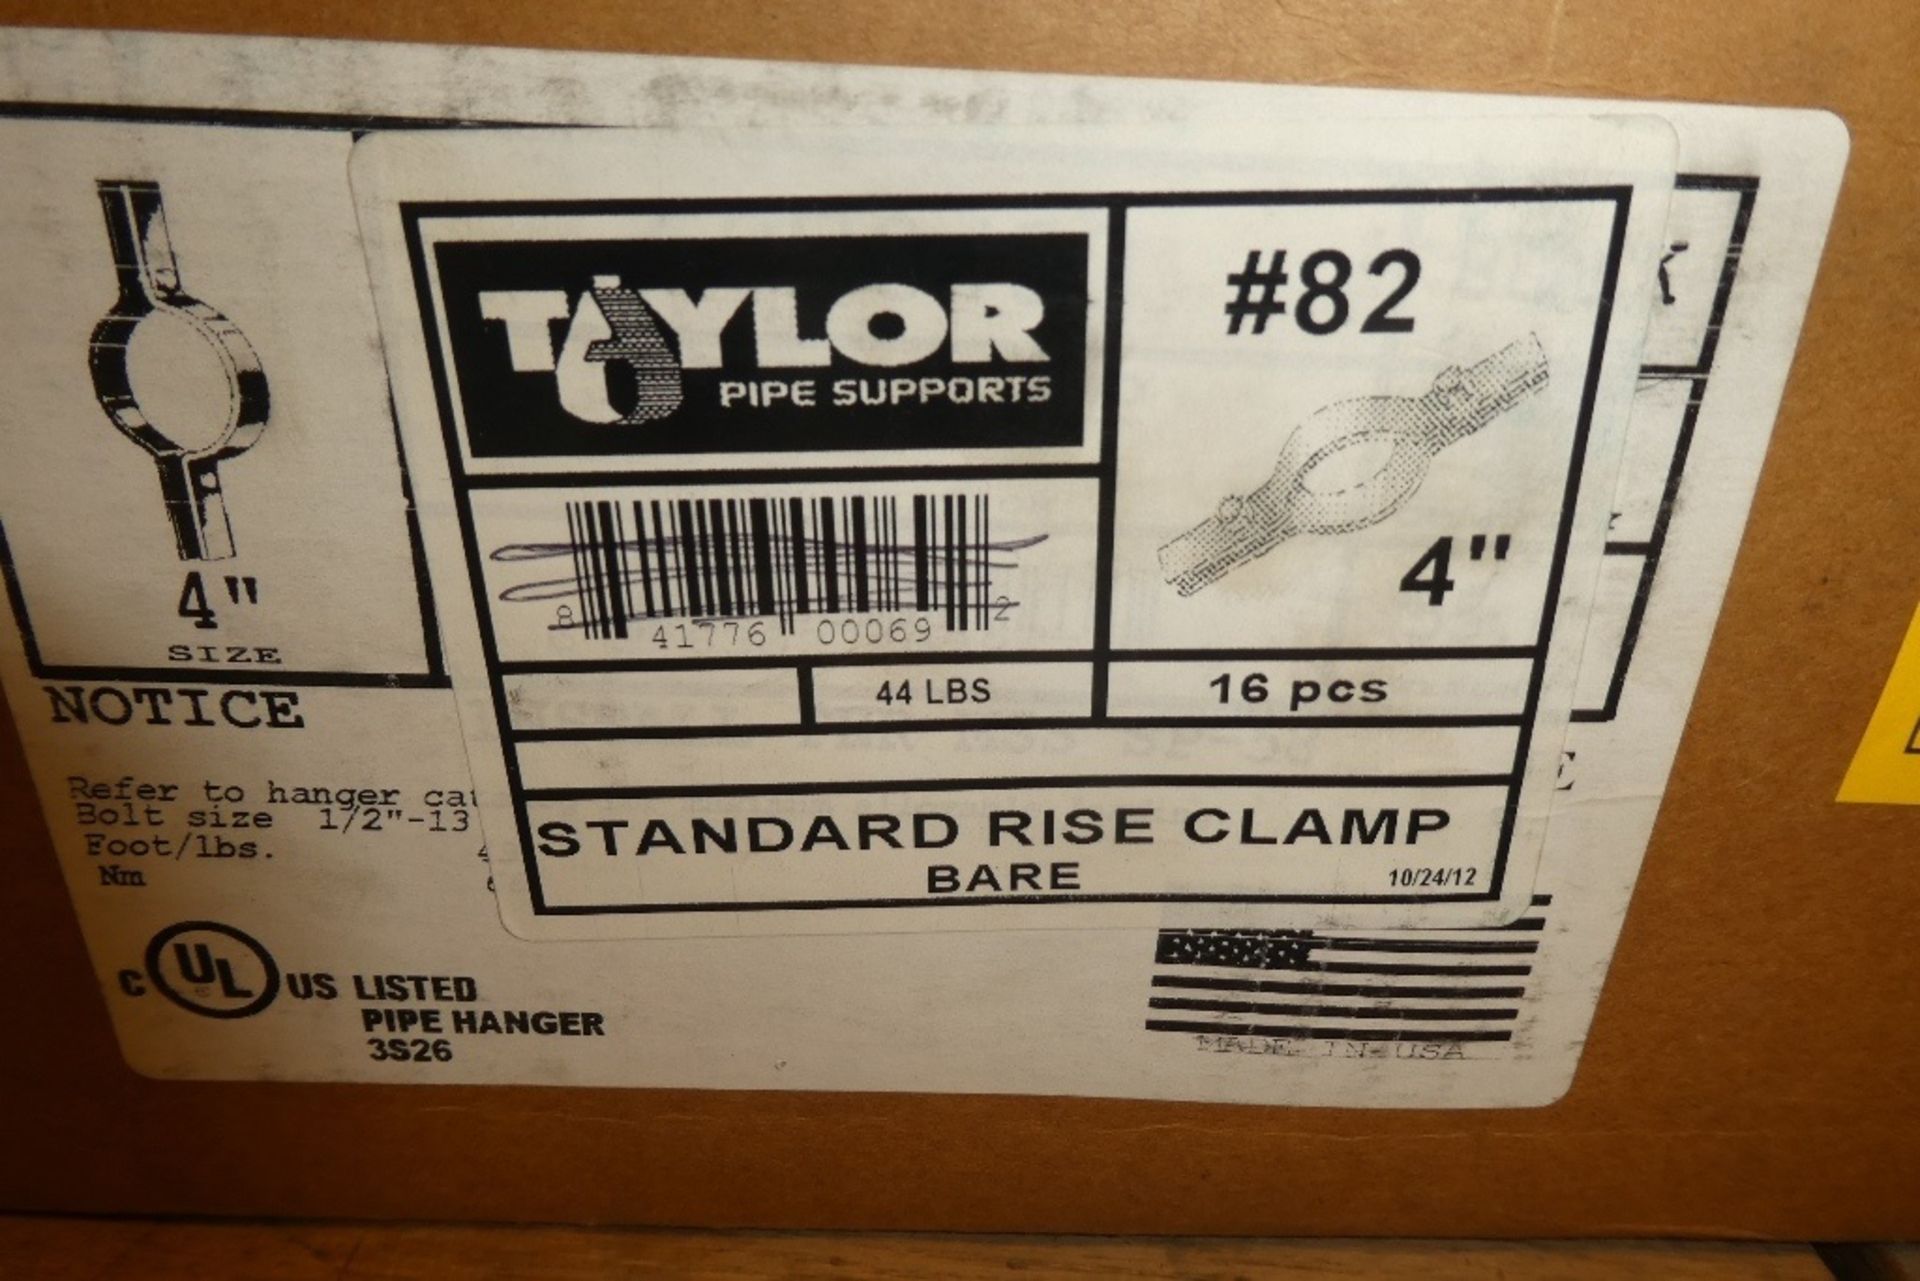 L/O 4" STANDARD RISE CLAMPS - Image 2 of 2